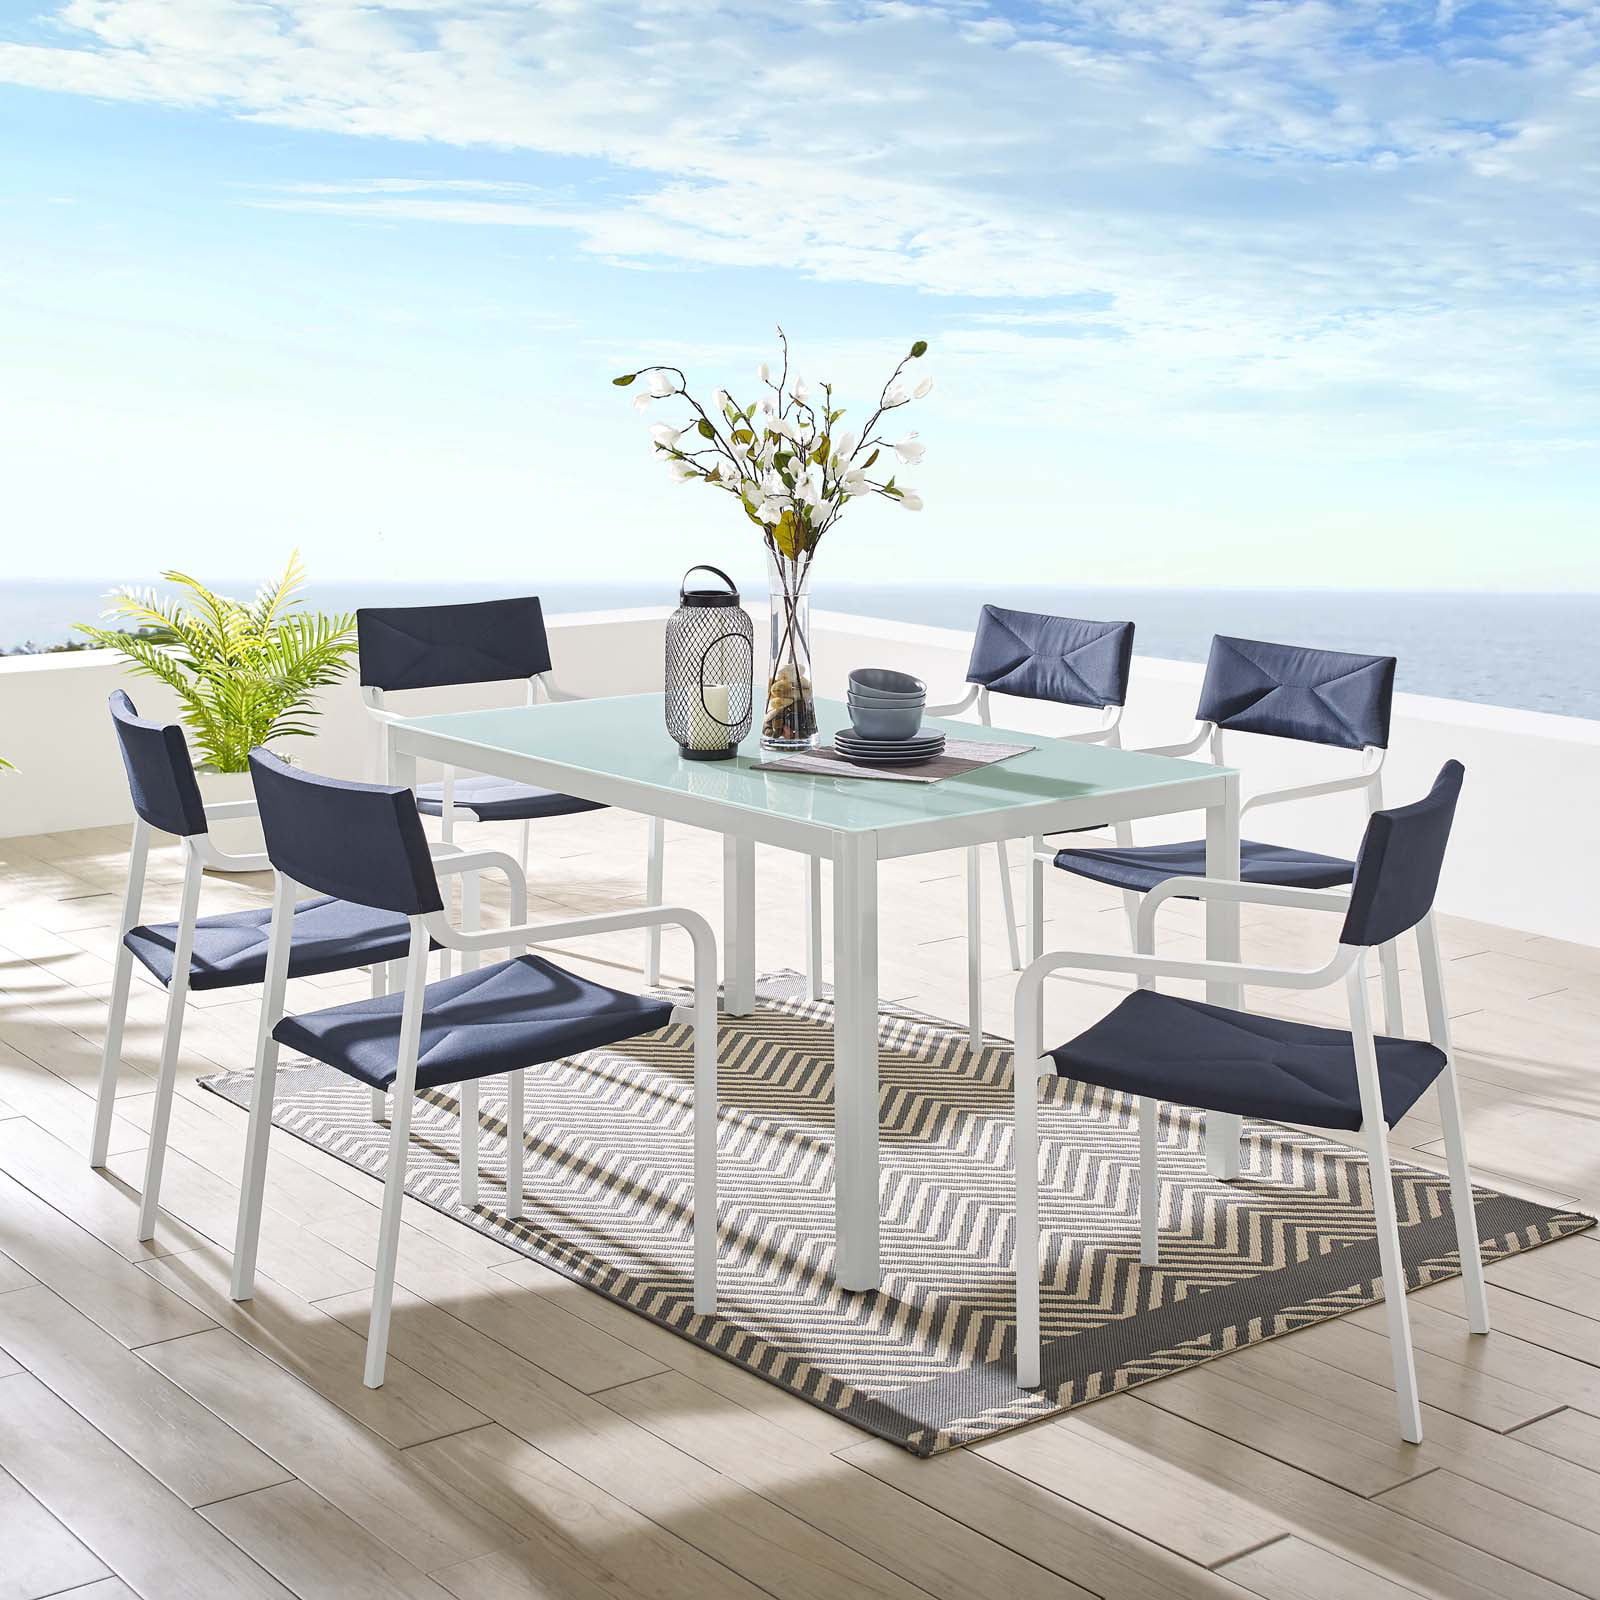 Comfortable Patio Dining Sets For Outdoor Entertaining